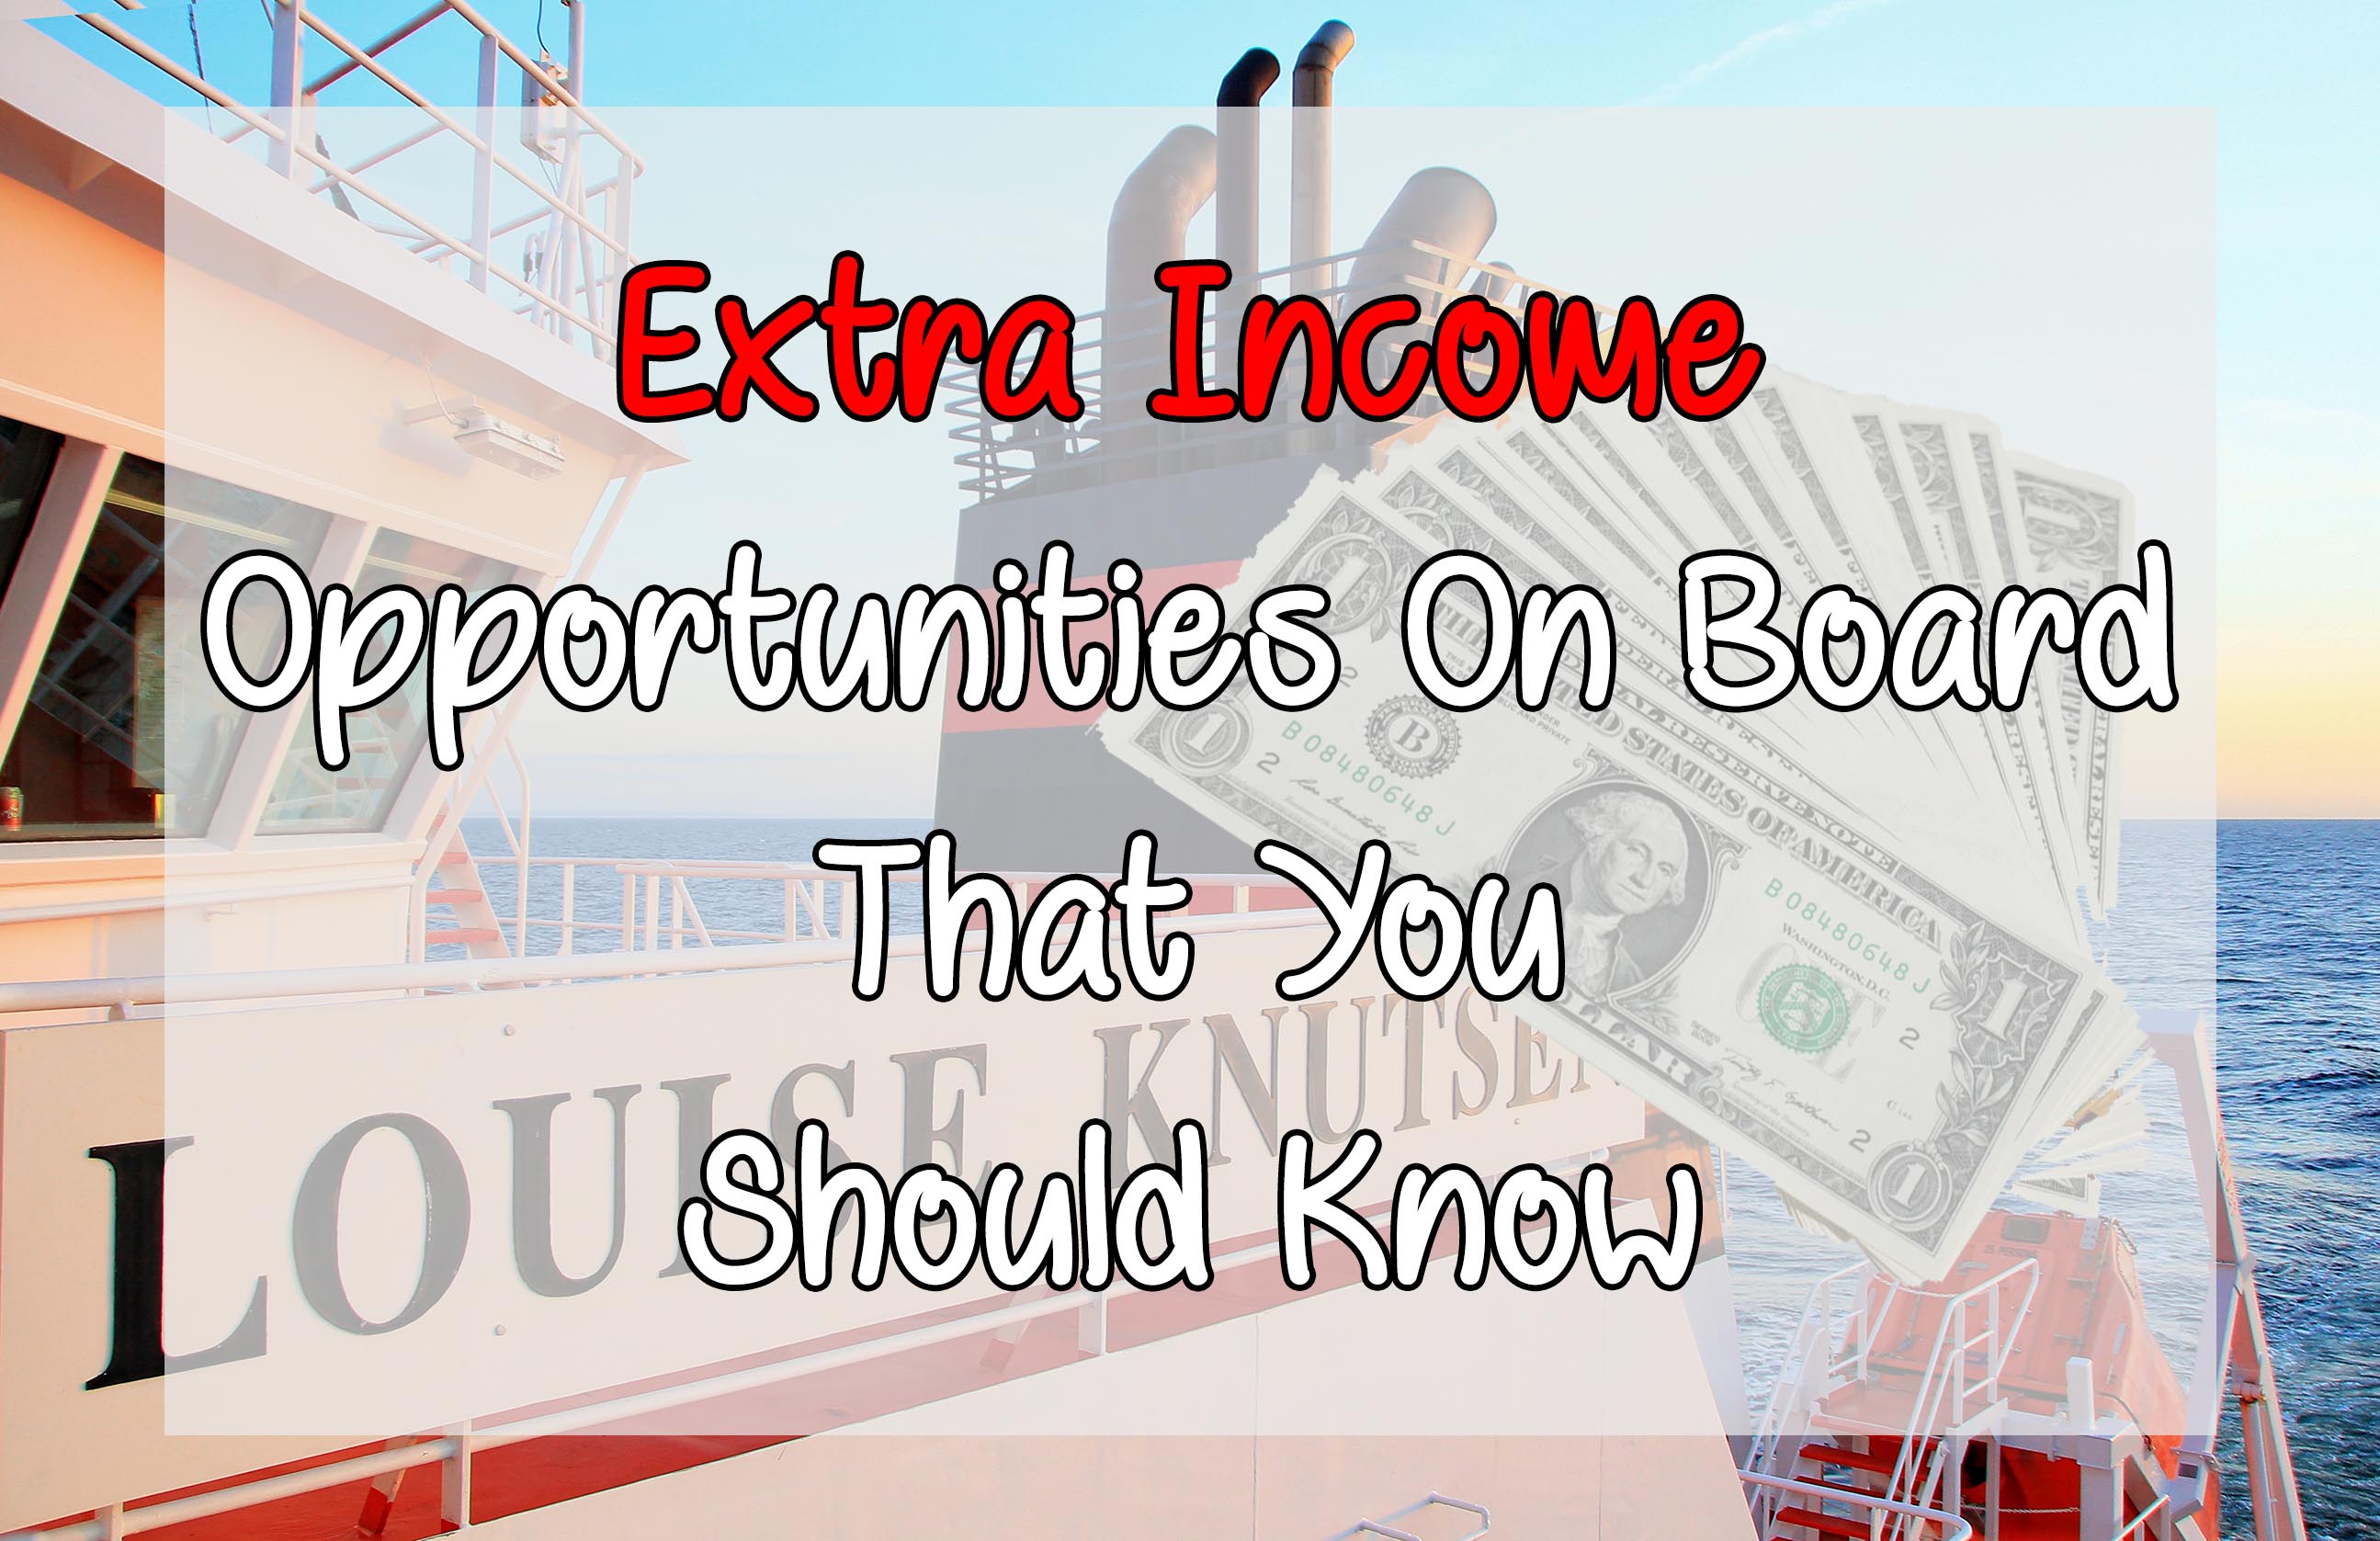 Extra income opportunities for seafarers on board that you should know. Cover photo.